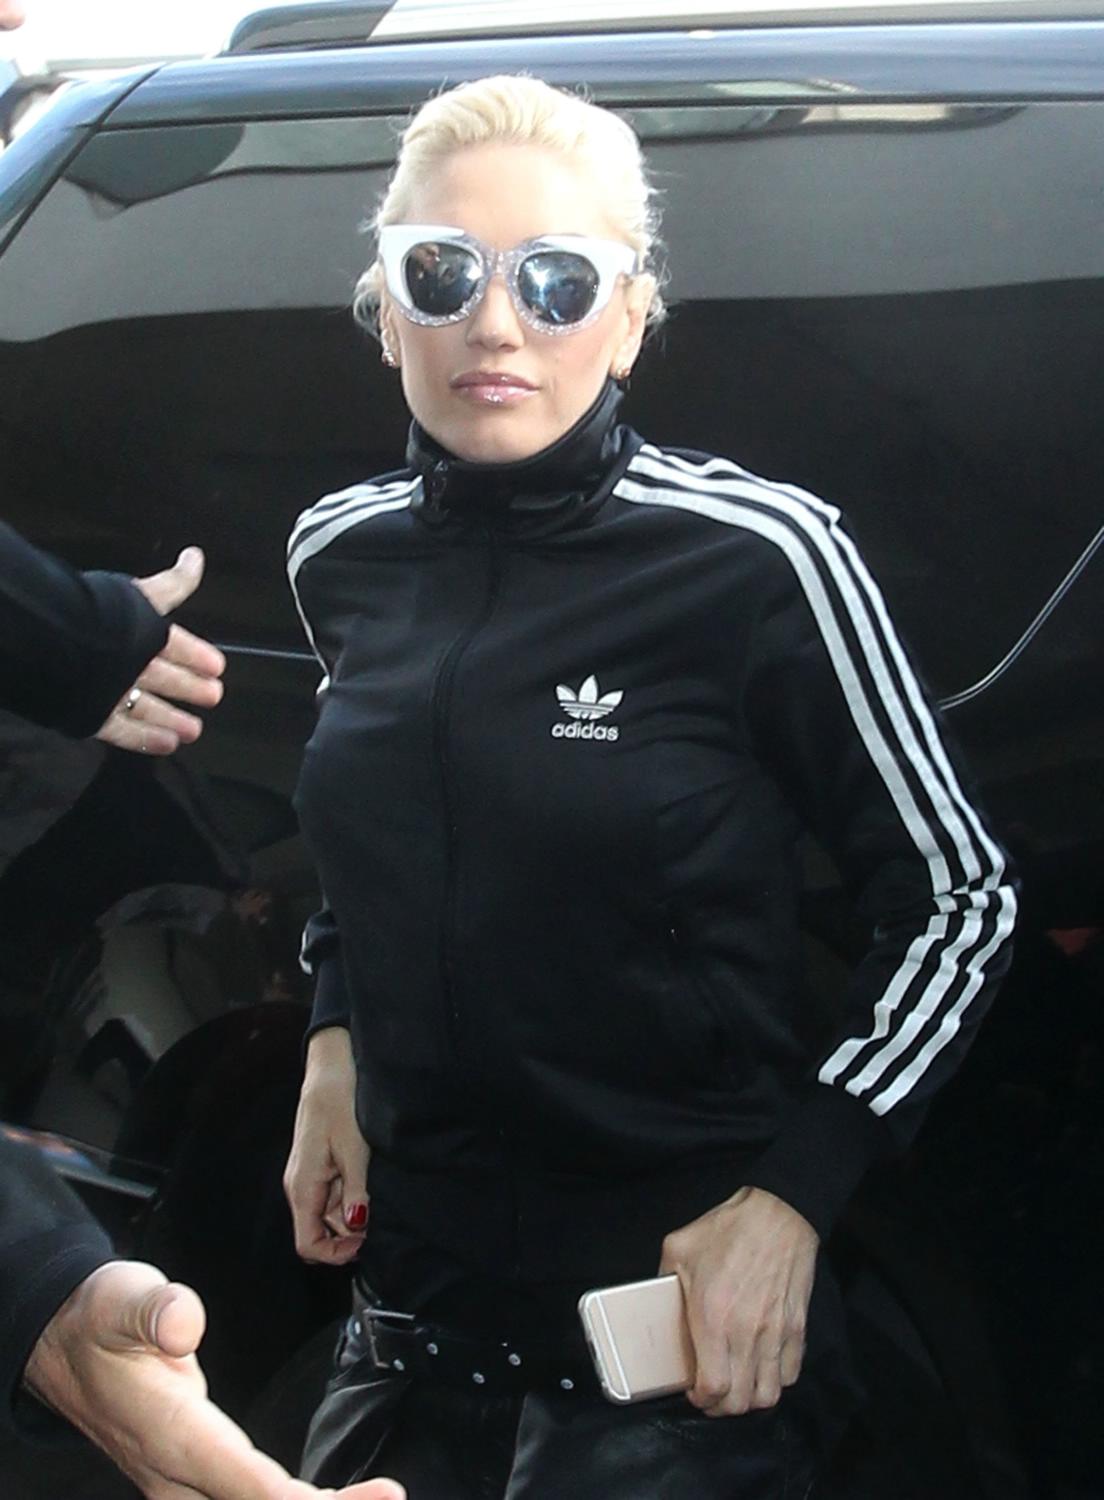 Gwen Stefani departing from the Los Angeles International Airport